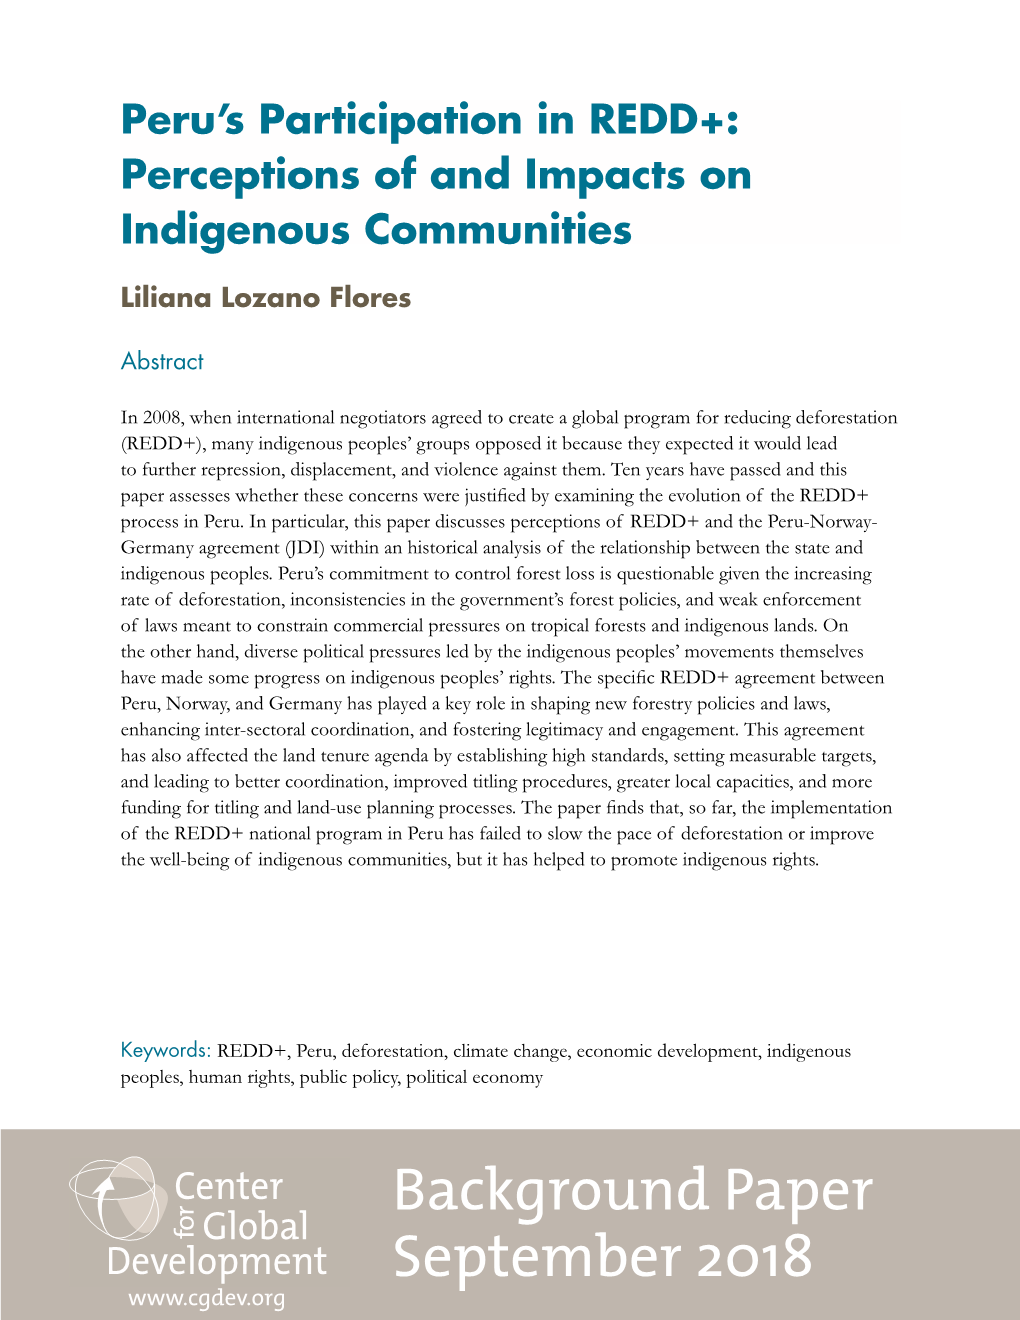 Peru's Participation in REDD+: Perceptions of and Impacts On